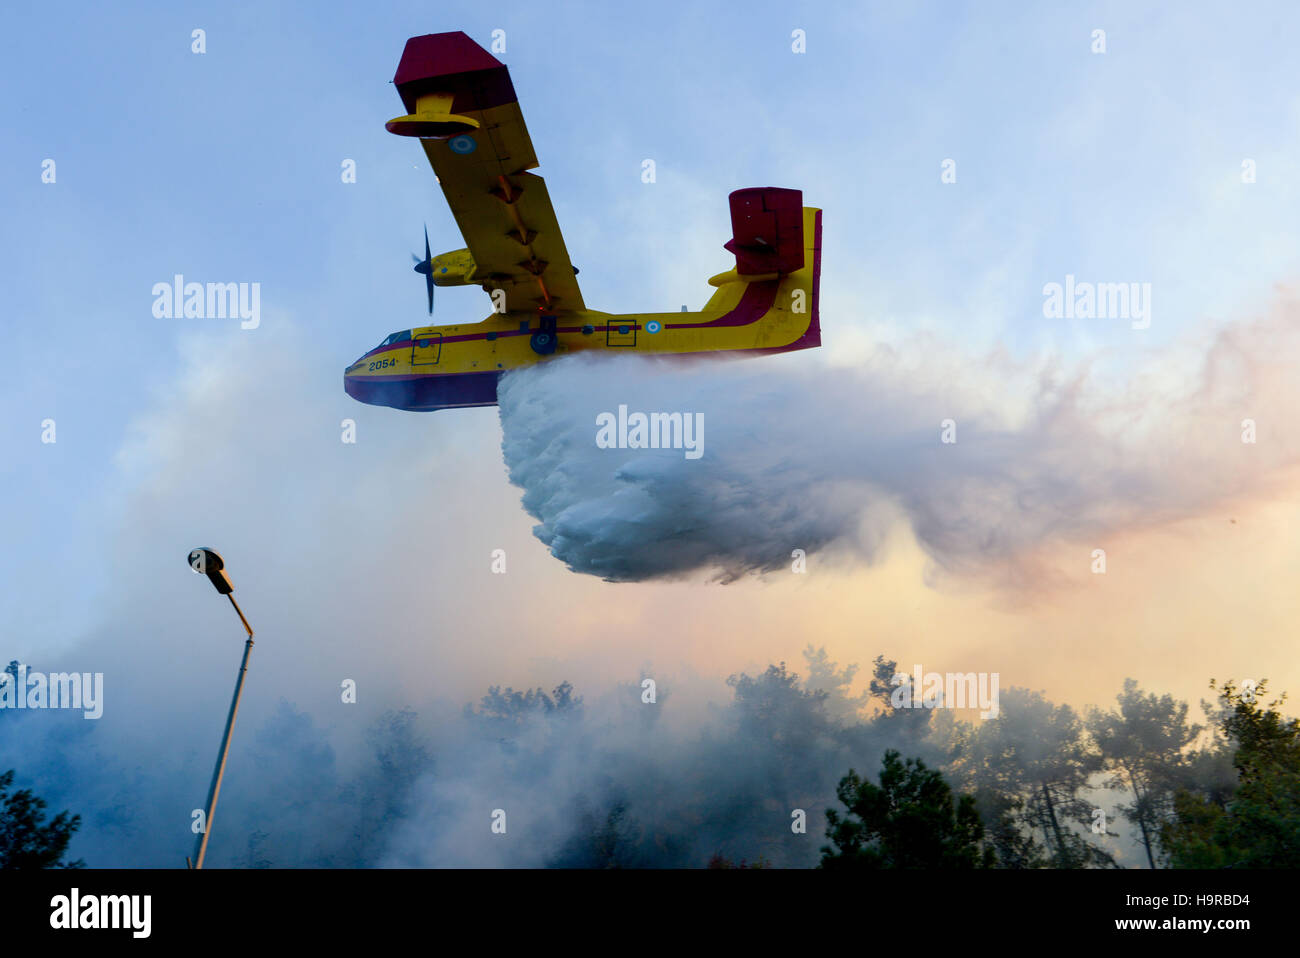 Haifa, Israel. 24th Nov, 2016. A plane tries to extinguish a fire in Haifa, Israel, Nov. 24, 2016. Fires on Thursday forced a widespread evacuation in Haifa. Tens of thousands of residents were forced to evacuate from around 11 neighborhoods in Haifa, along with Haifa University and many businesses. © JINI/Xinhua/Alamy Live News Stock Photo